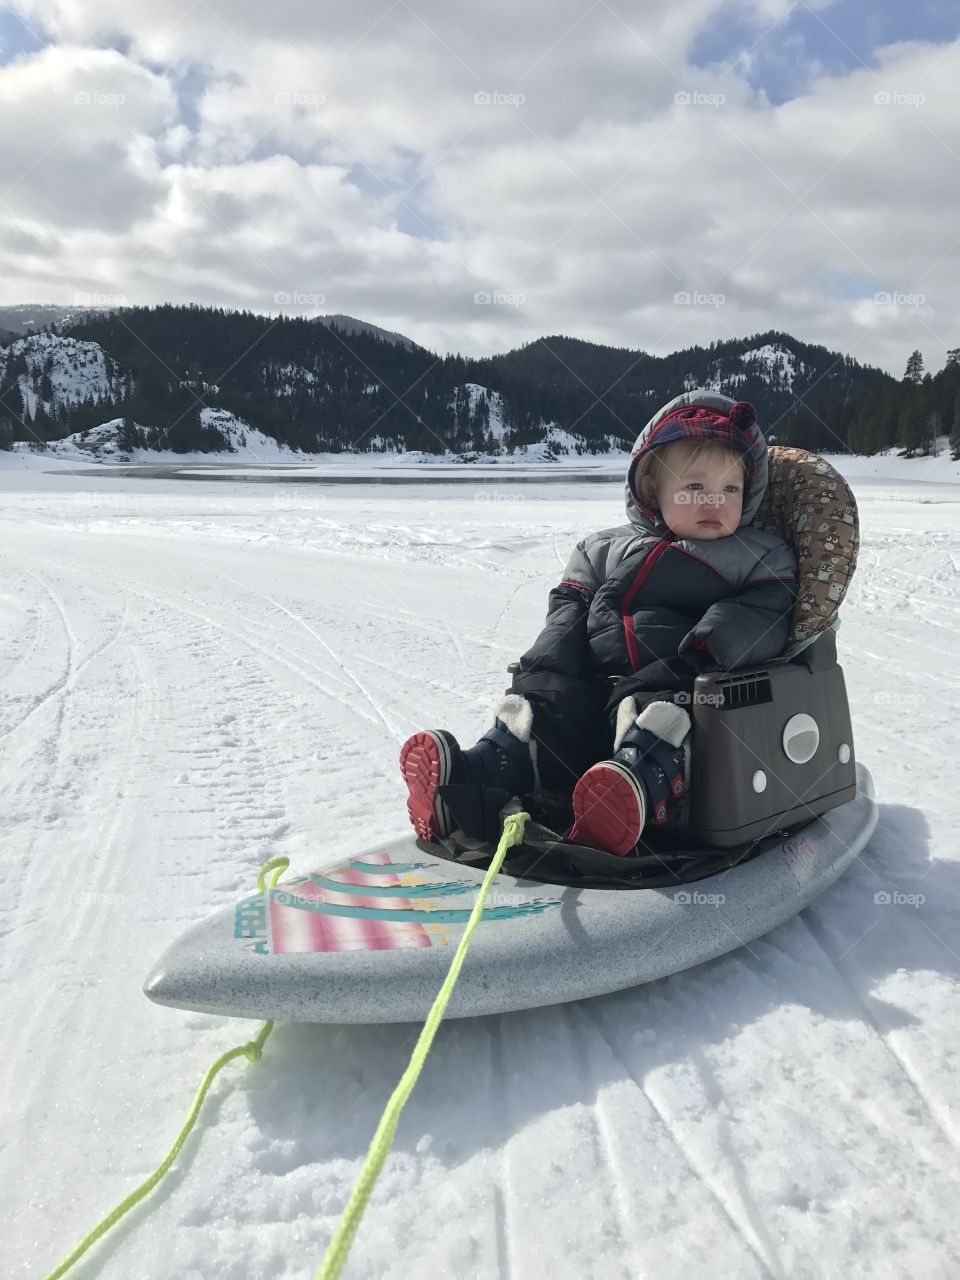 Child in sledge on snowy landscape